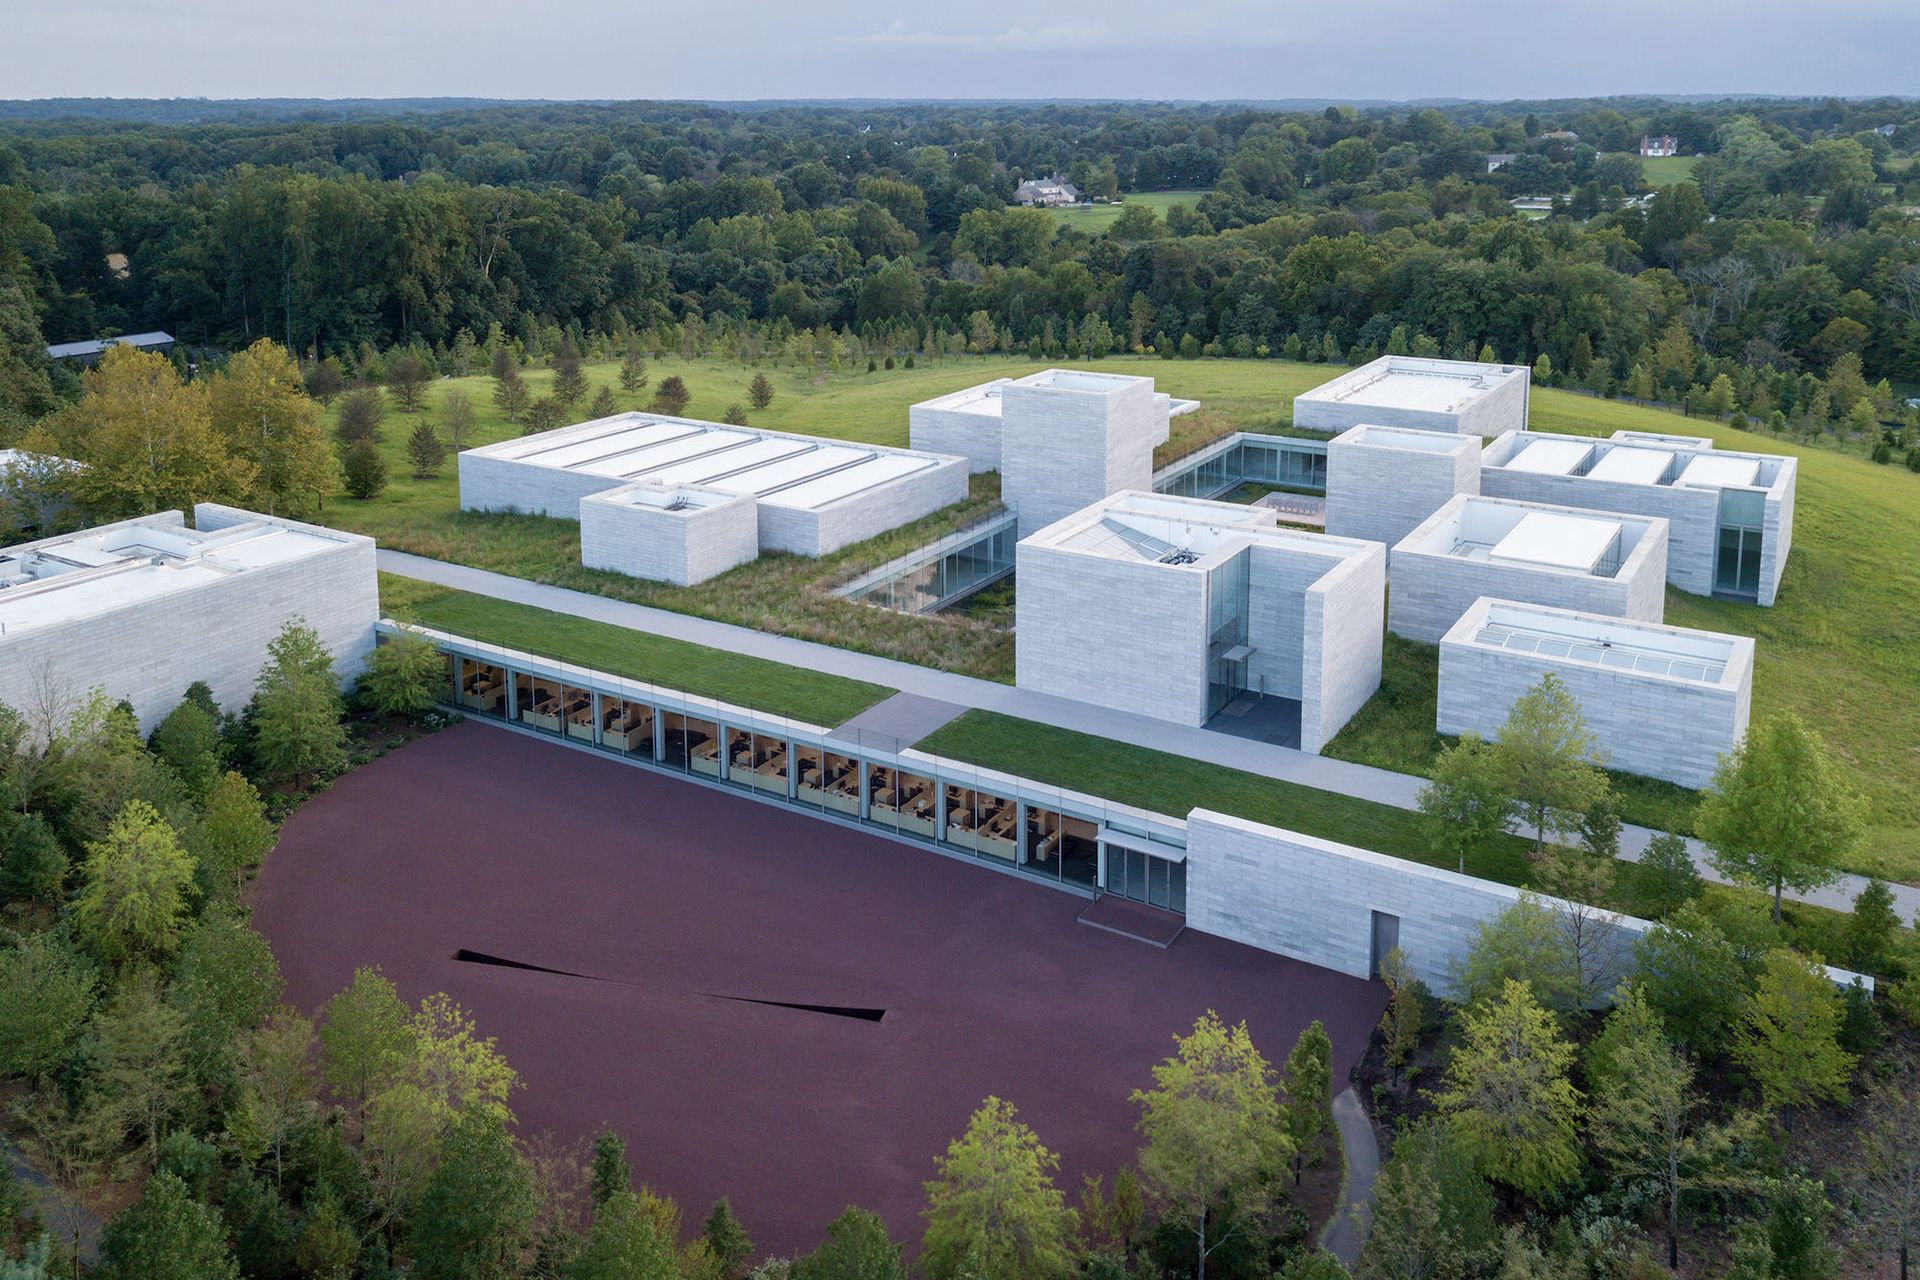 Aerial of the Pavilions at the Glenstone Museum in Potomac, Maryland Photo: Iwan Baan. Courtesy: Glenstone Museum